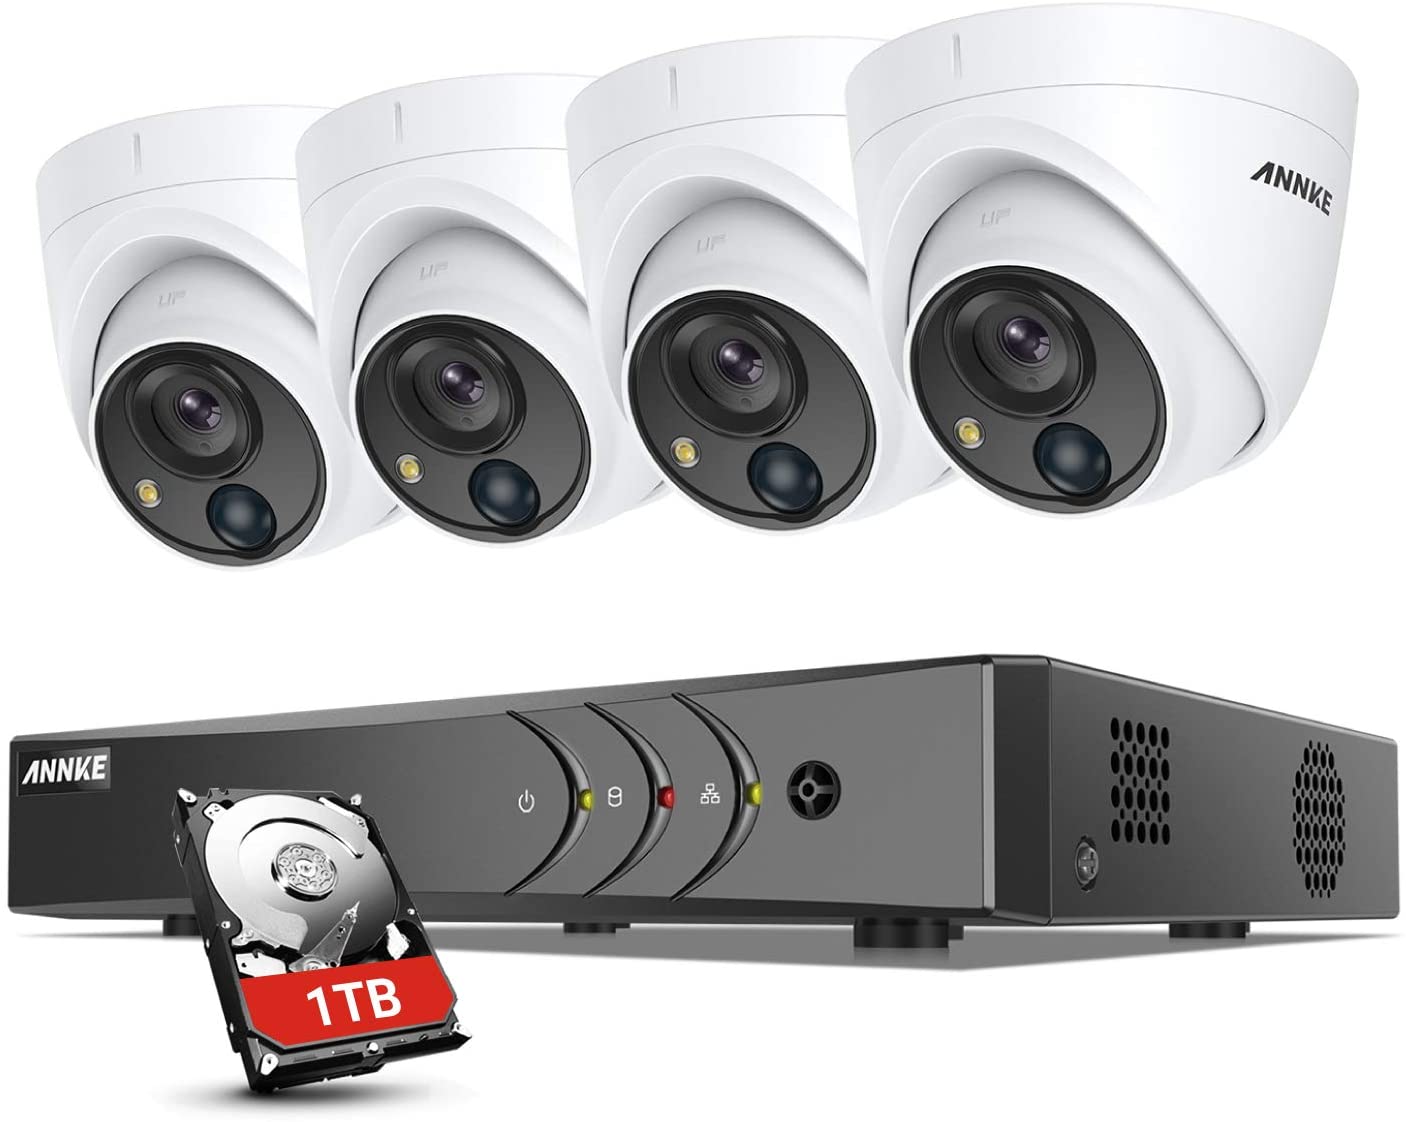 ANNKE S500 5MP Super HD 8 Channel Surveillance Camera Set, 5MP Video Surveillance System with 4x 5MP IP67 PIR Dome Cameras, 8CH H, 265 Pro+ DVR Recorder with 1TB HDD